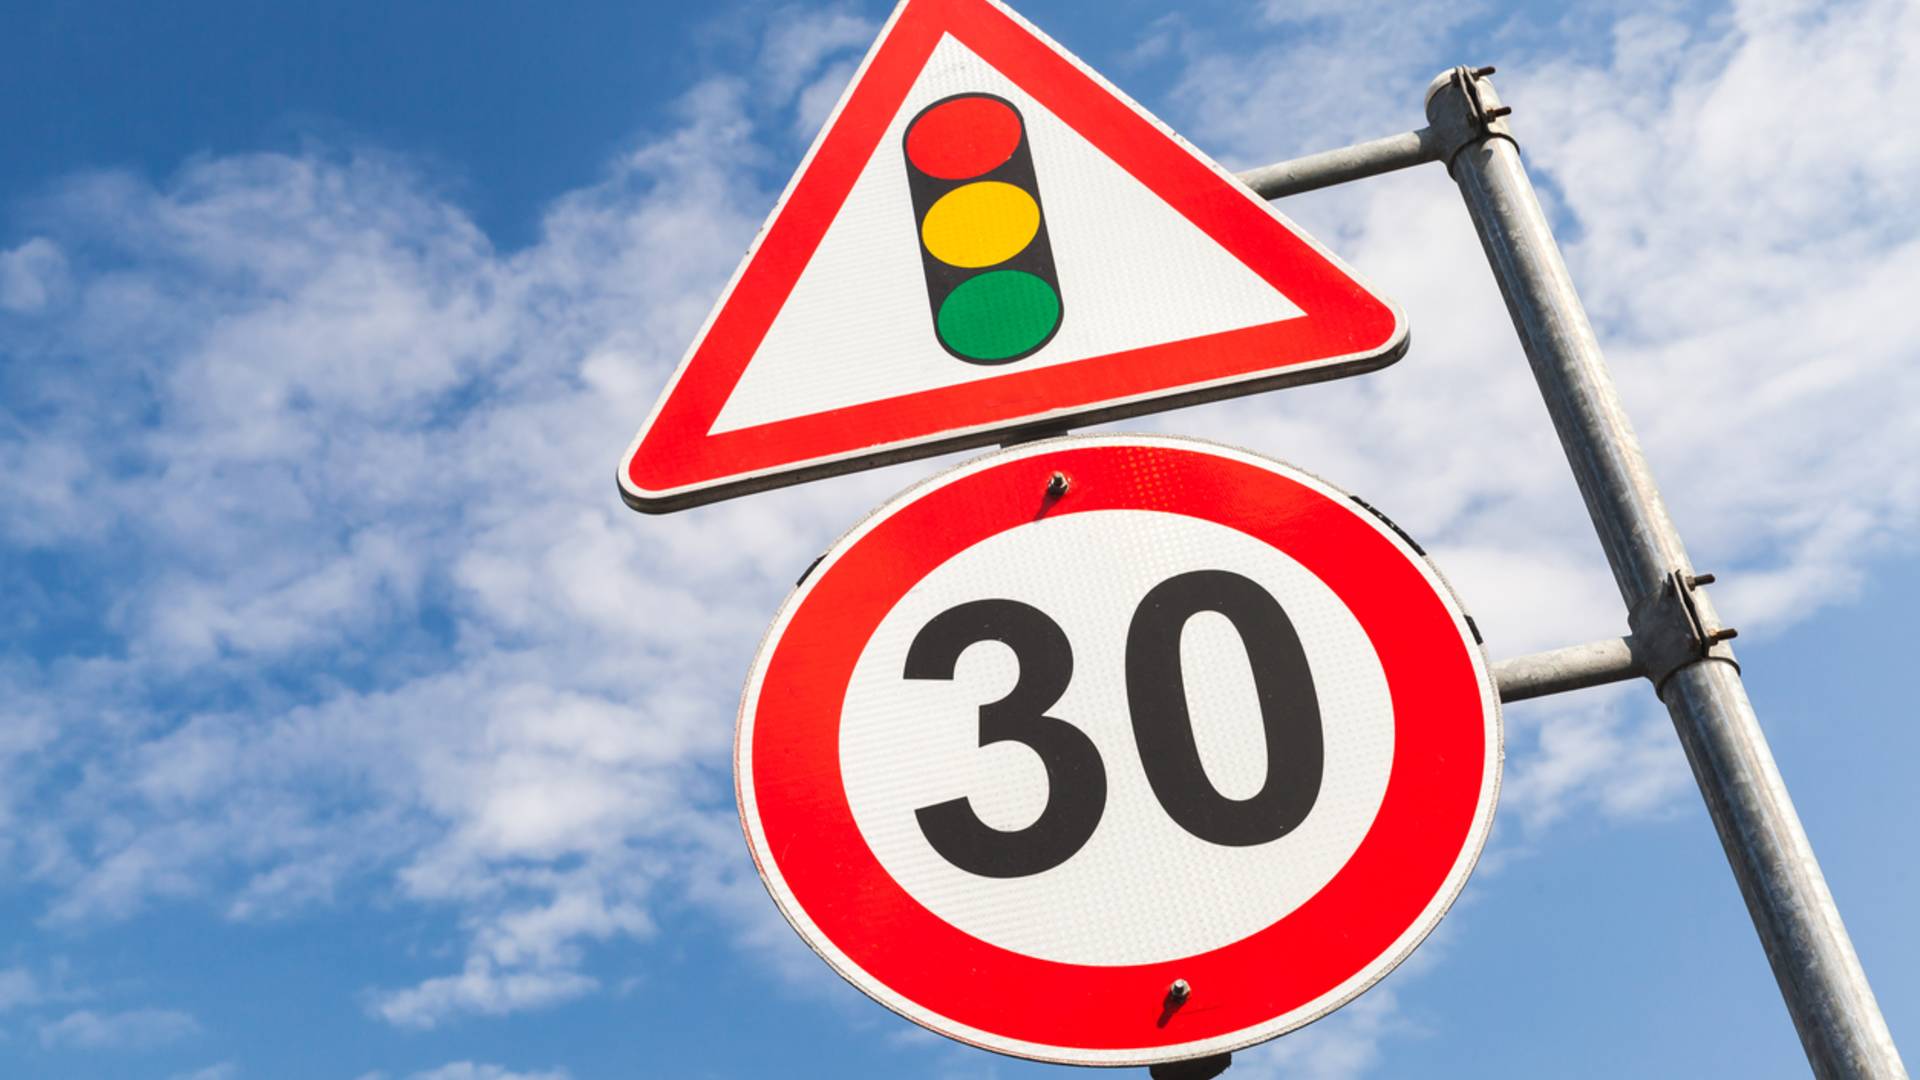 5 Types of Traffic Signs that Those Who Travel a Lot Should Know